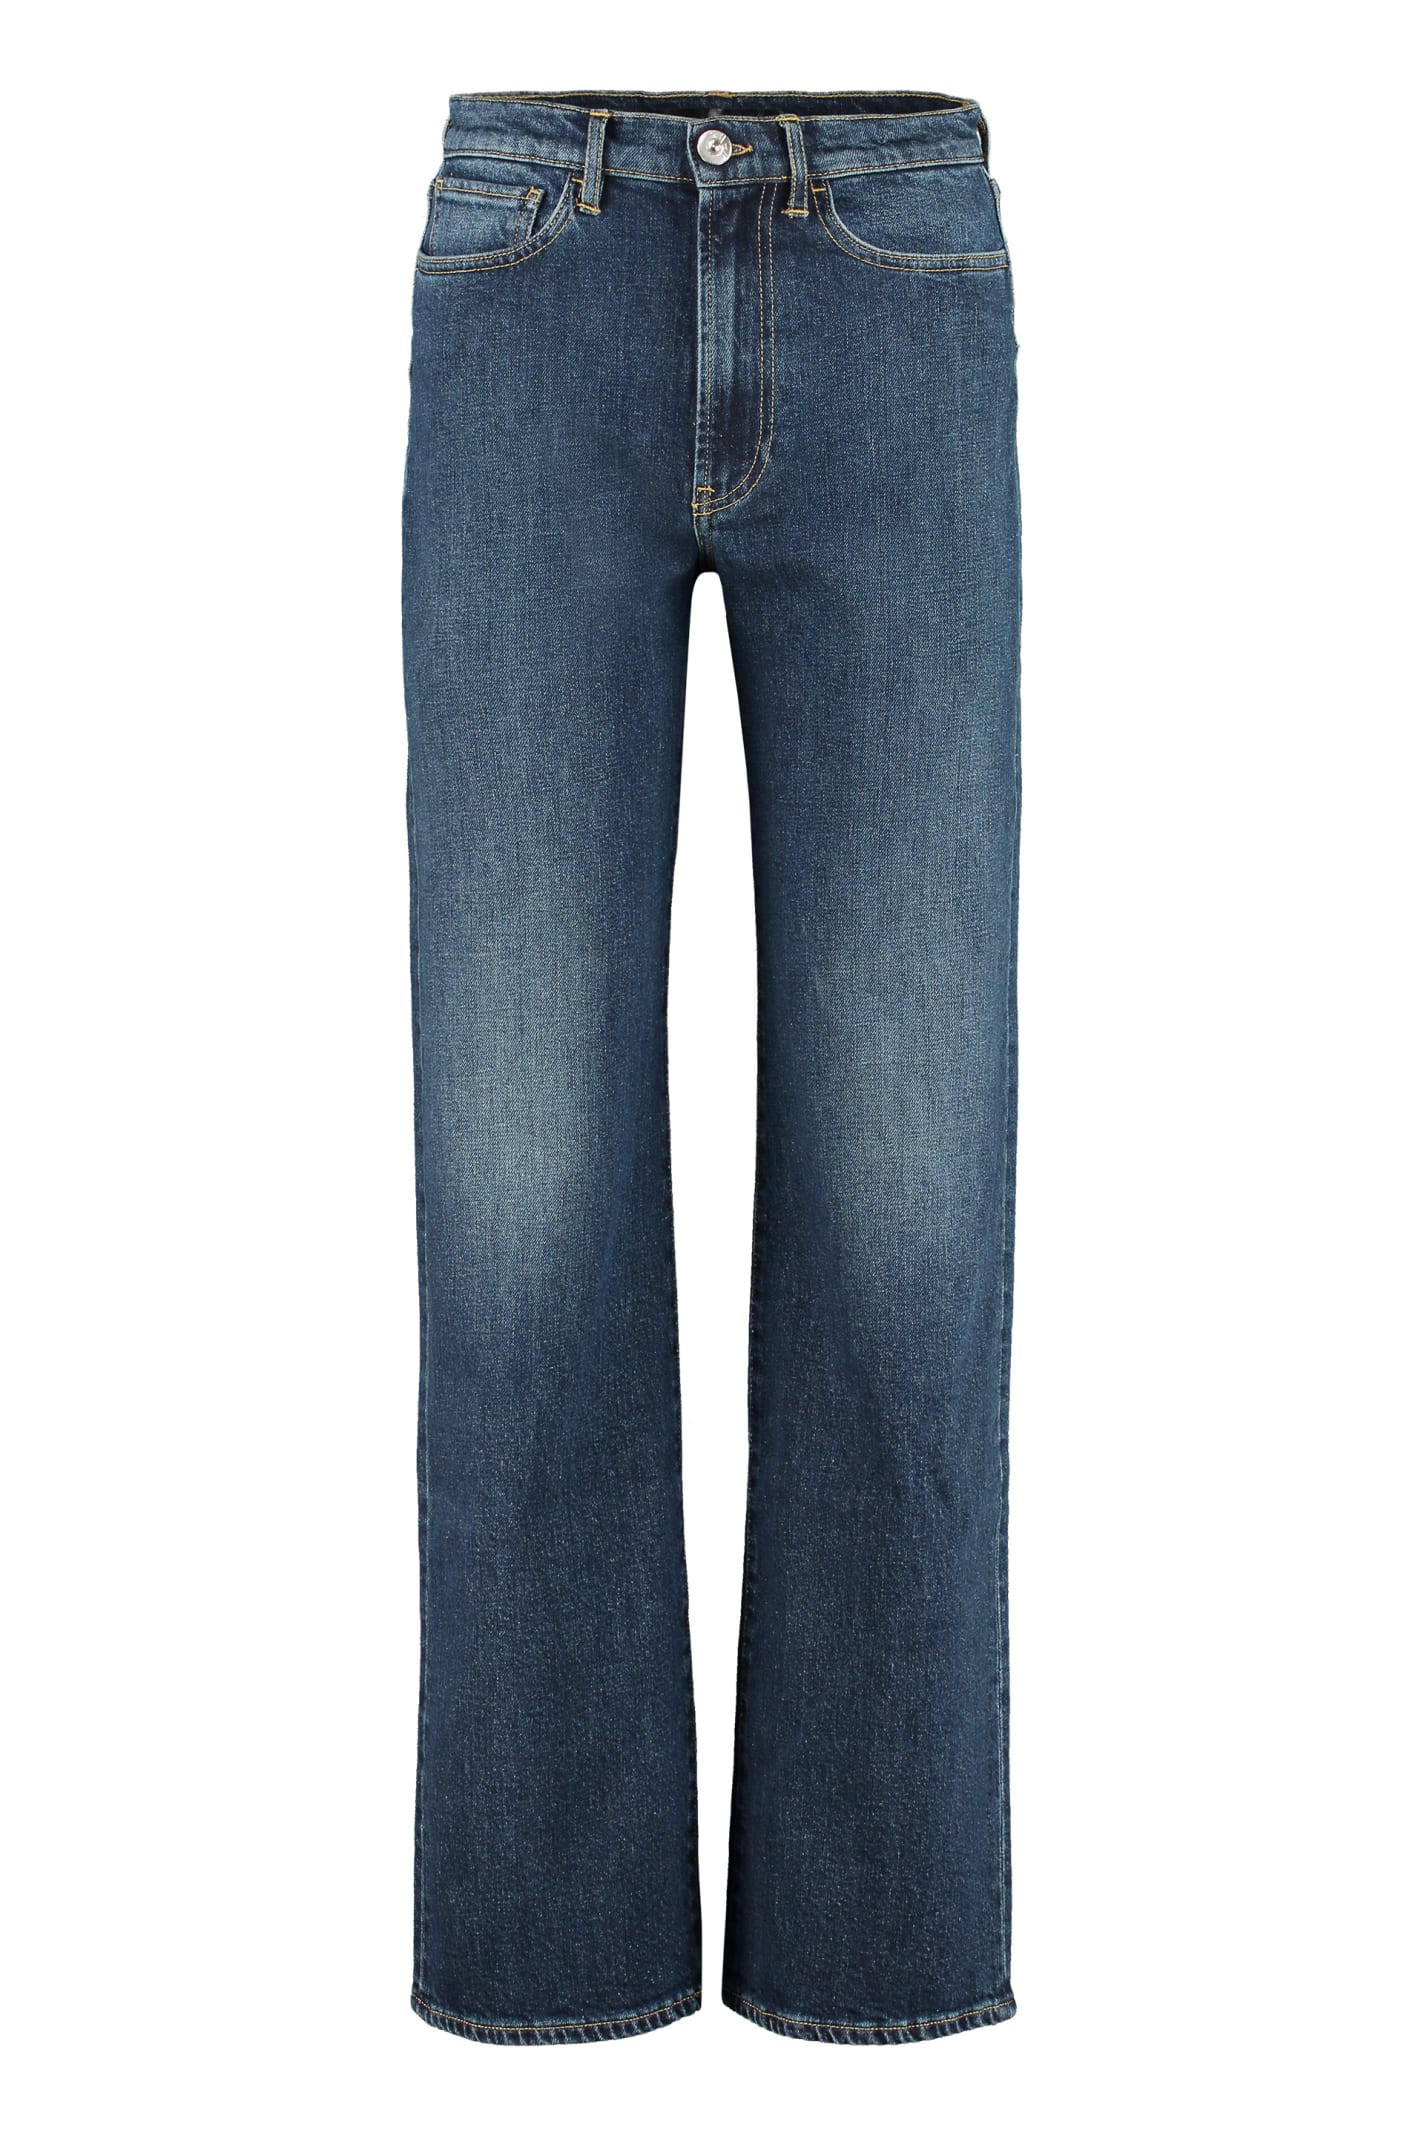 3x1 Kate High-rise Jeans